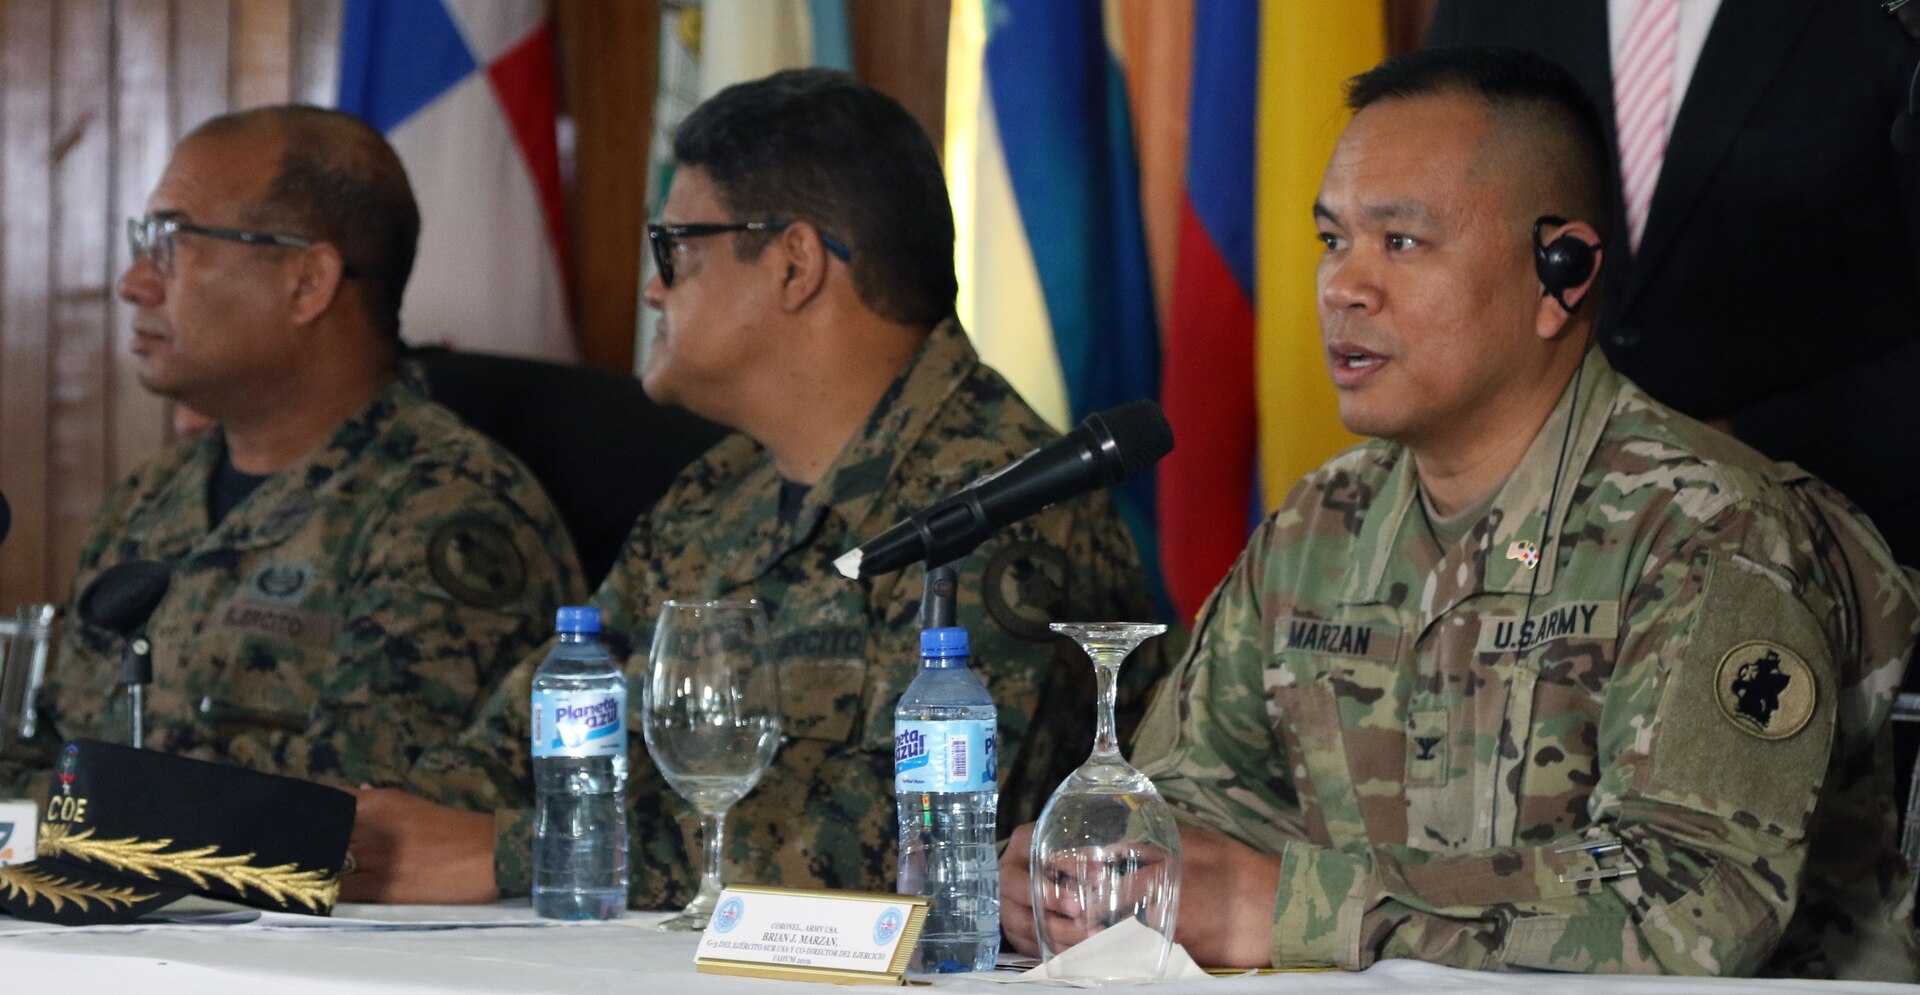 U.S. Army Col. Brian Marzan (right), Division Chief of U.S. Army South Training and Exercises and co-director of Fuerzas Aliadas Humanitarias 2019, answers media questions at the opening ceremony of FA-HUM 19 in Santo Domingo, Dominican Republic, May 6, 2019. FA-HUM 19 is a U.S. Army South-sponsored foreign humanitarian assistance and disaster relief exercise designed to build U.S. partner nation’s capacity for civil and military response to major disasters. More than 100 national experts from over 13 Latin American countries operated jointly throughout FA-HUM 19 simulations and training events from May 6-17 in the Dominican Republic.